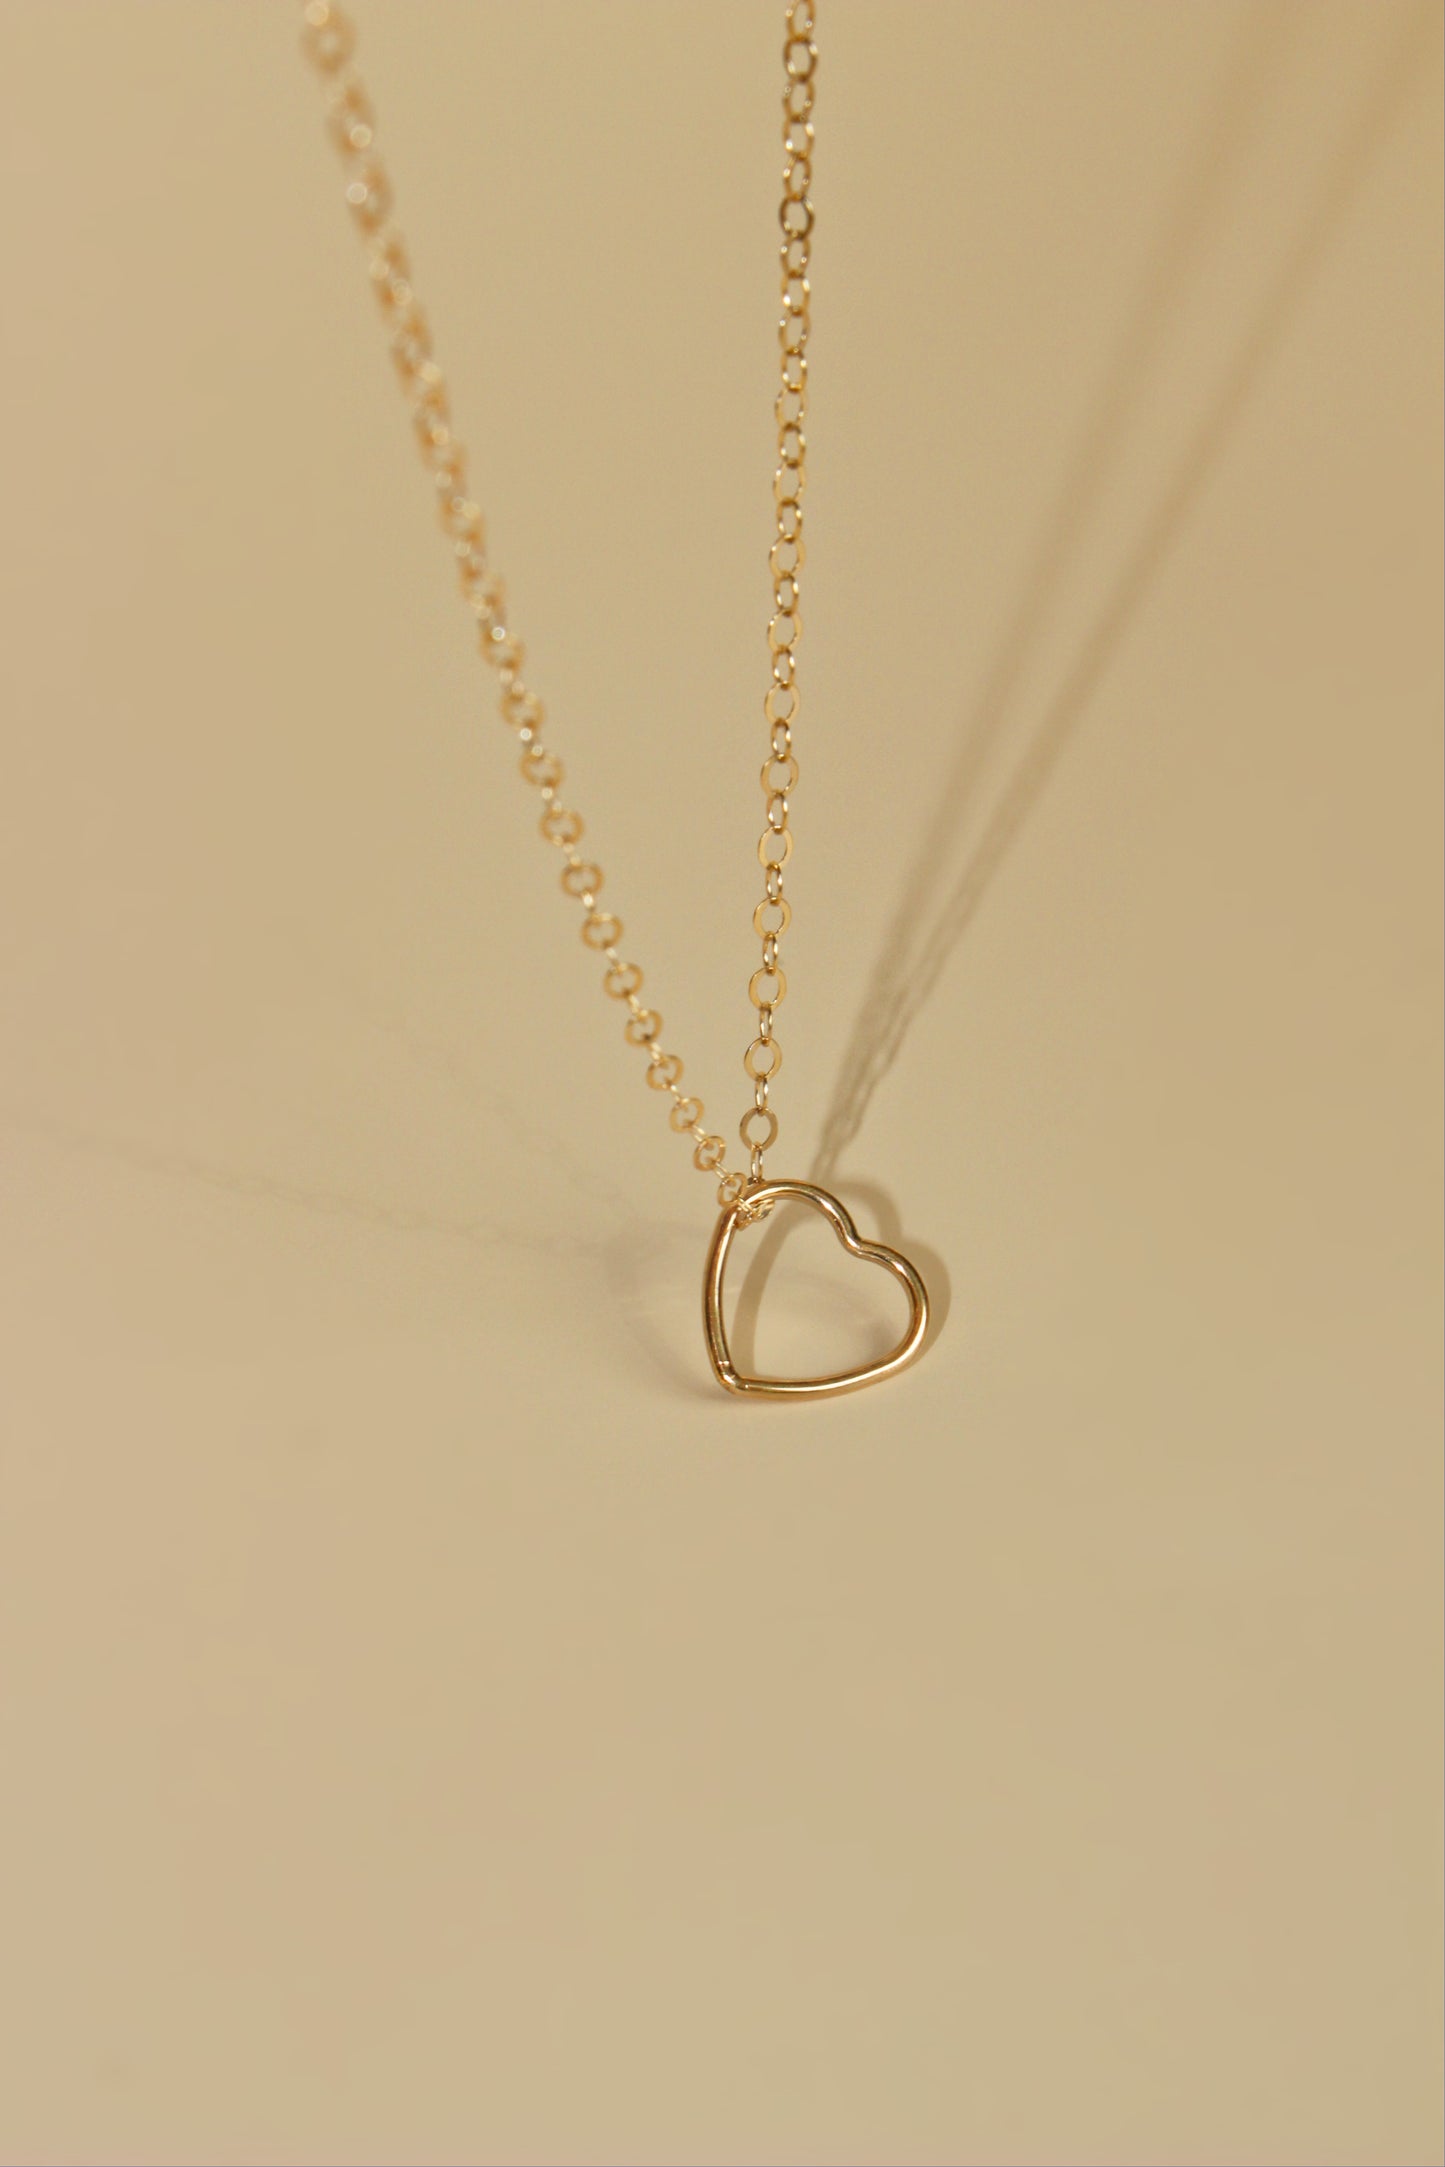 Moon or Heart wire catcher ∙ 14K Gold Filled Necklace ∙ Moon pendant charm necklace